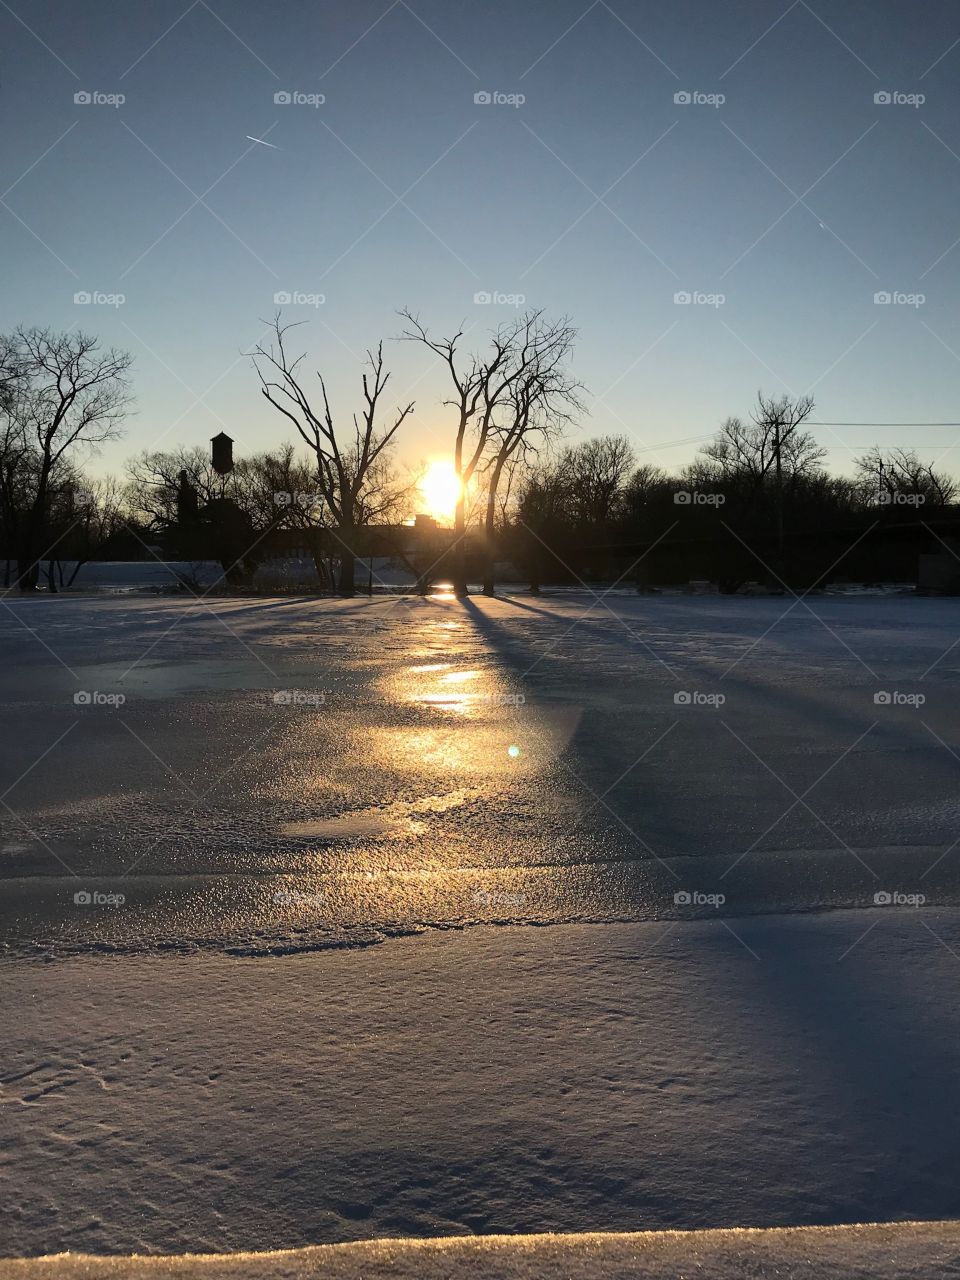 Sunset and ice